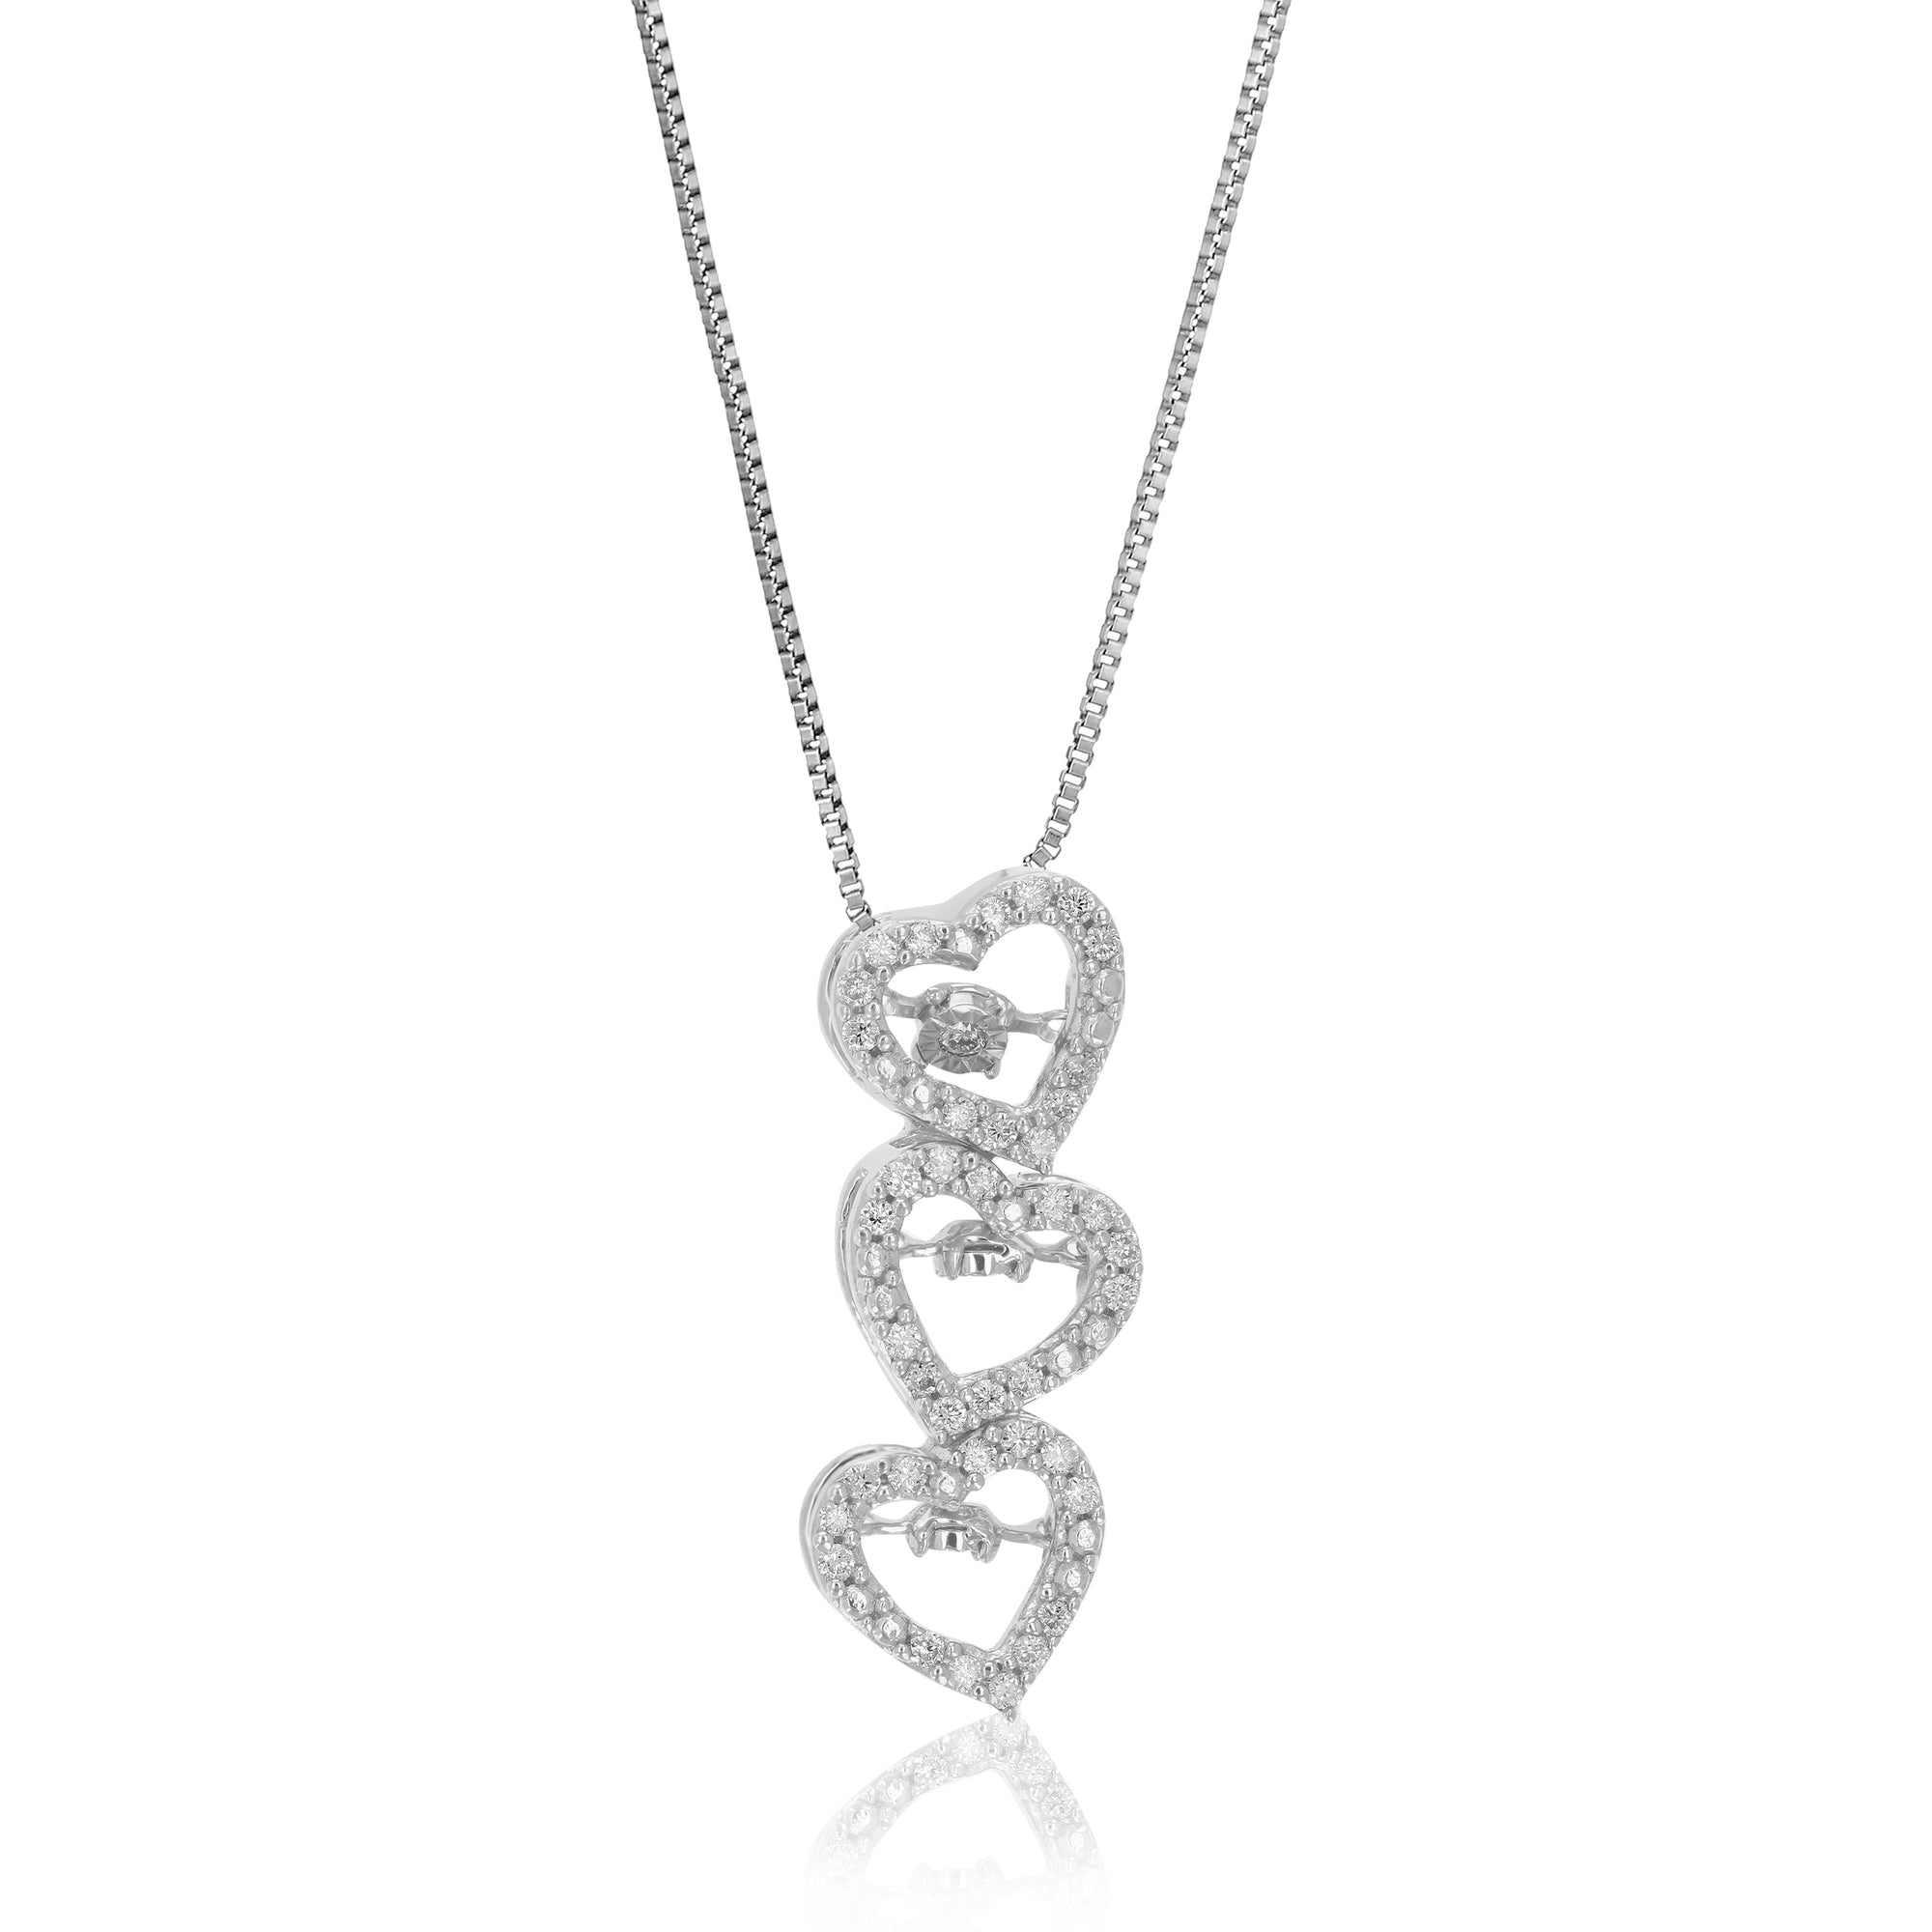 1/6 cttw Diamond Pendant Necklace for Women, Lab Grown Diamond Triple Heart Pendant Necklace in .925 Sterling Silver with Chain, Size 3/4 Inch